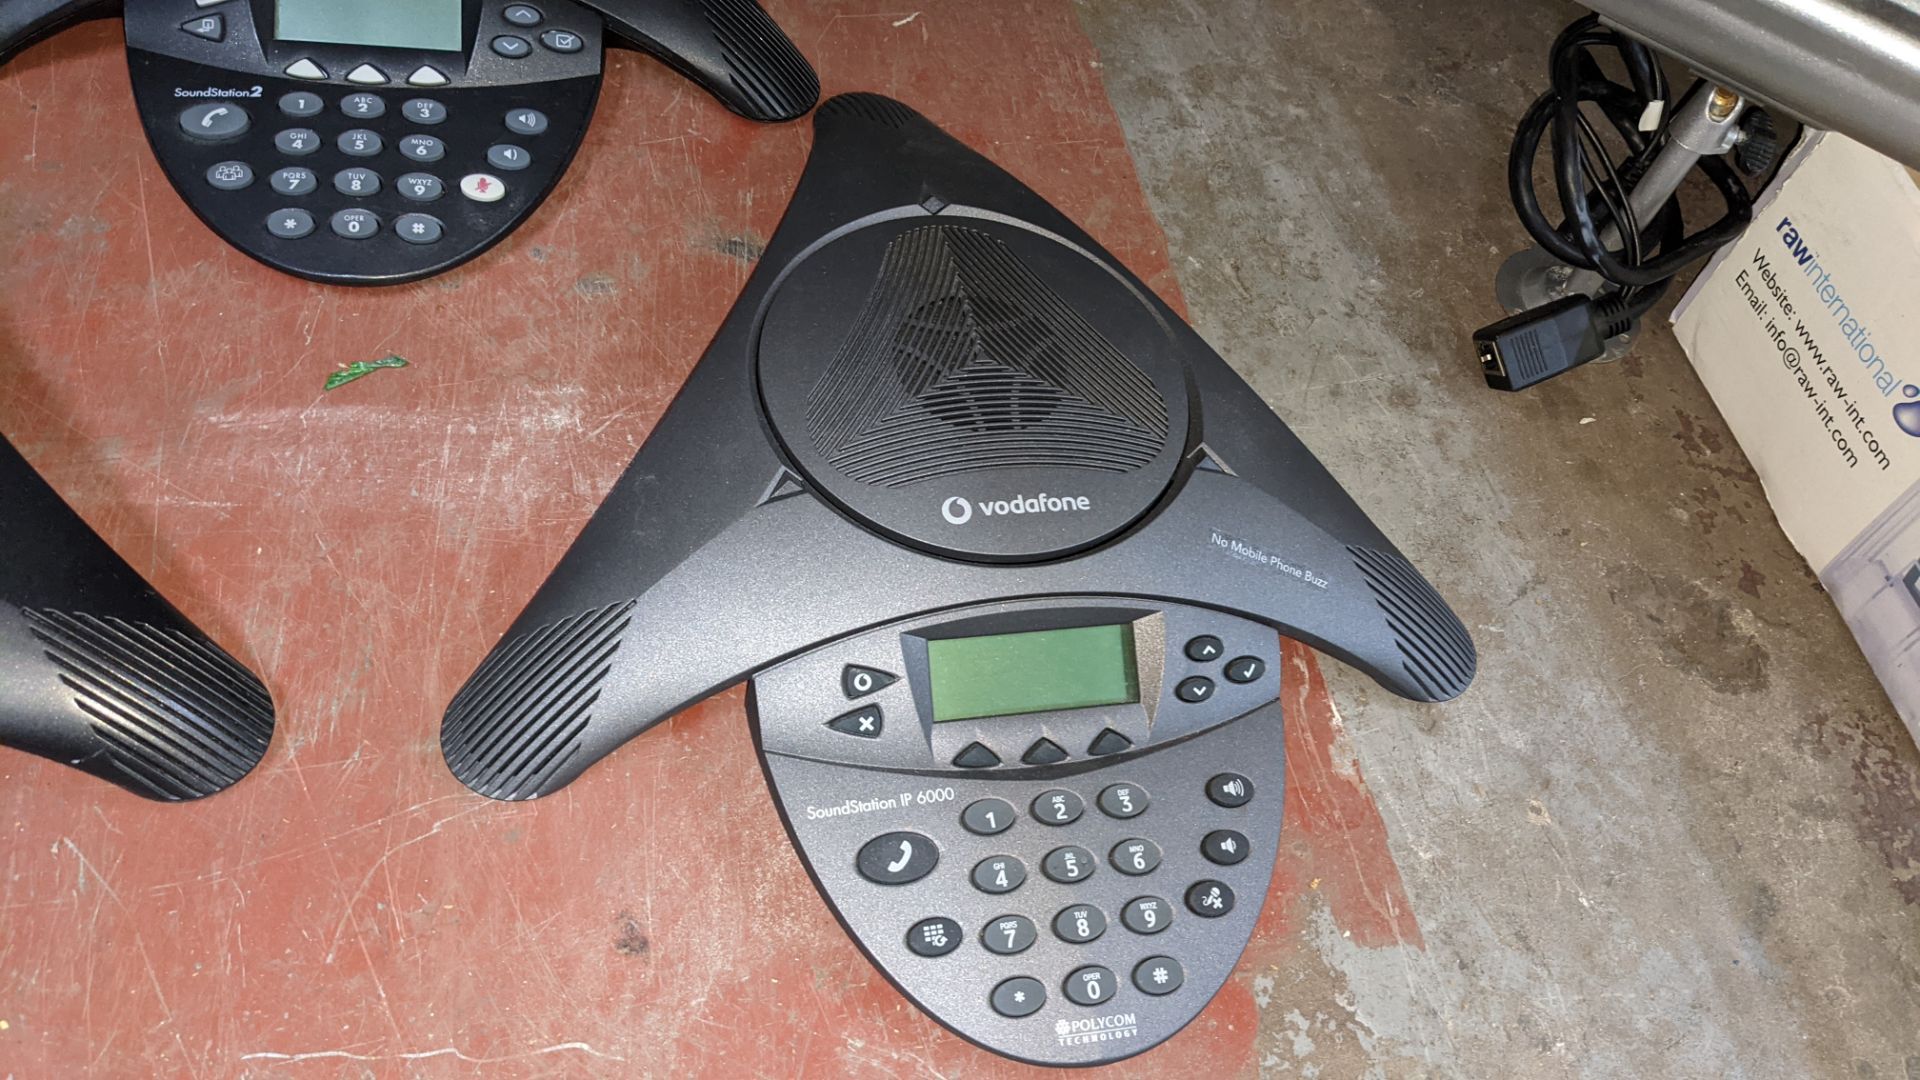 4 off Polycom SoundStation 2 conference phones. NB one of the units is badged Vodafone/IP6000, howe - Image 6 of 8